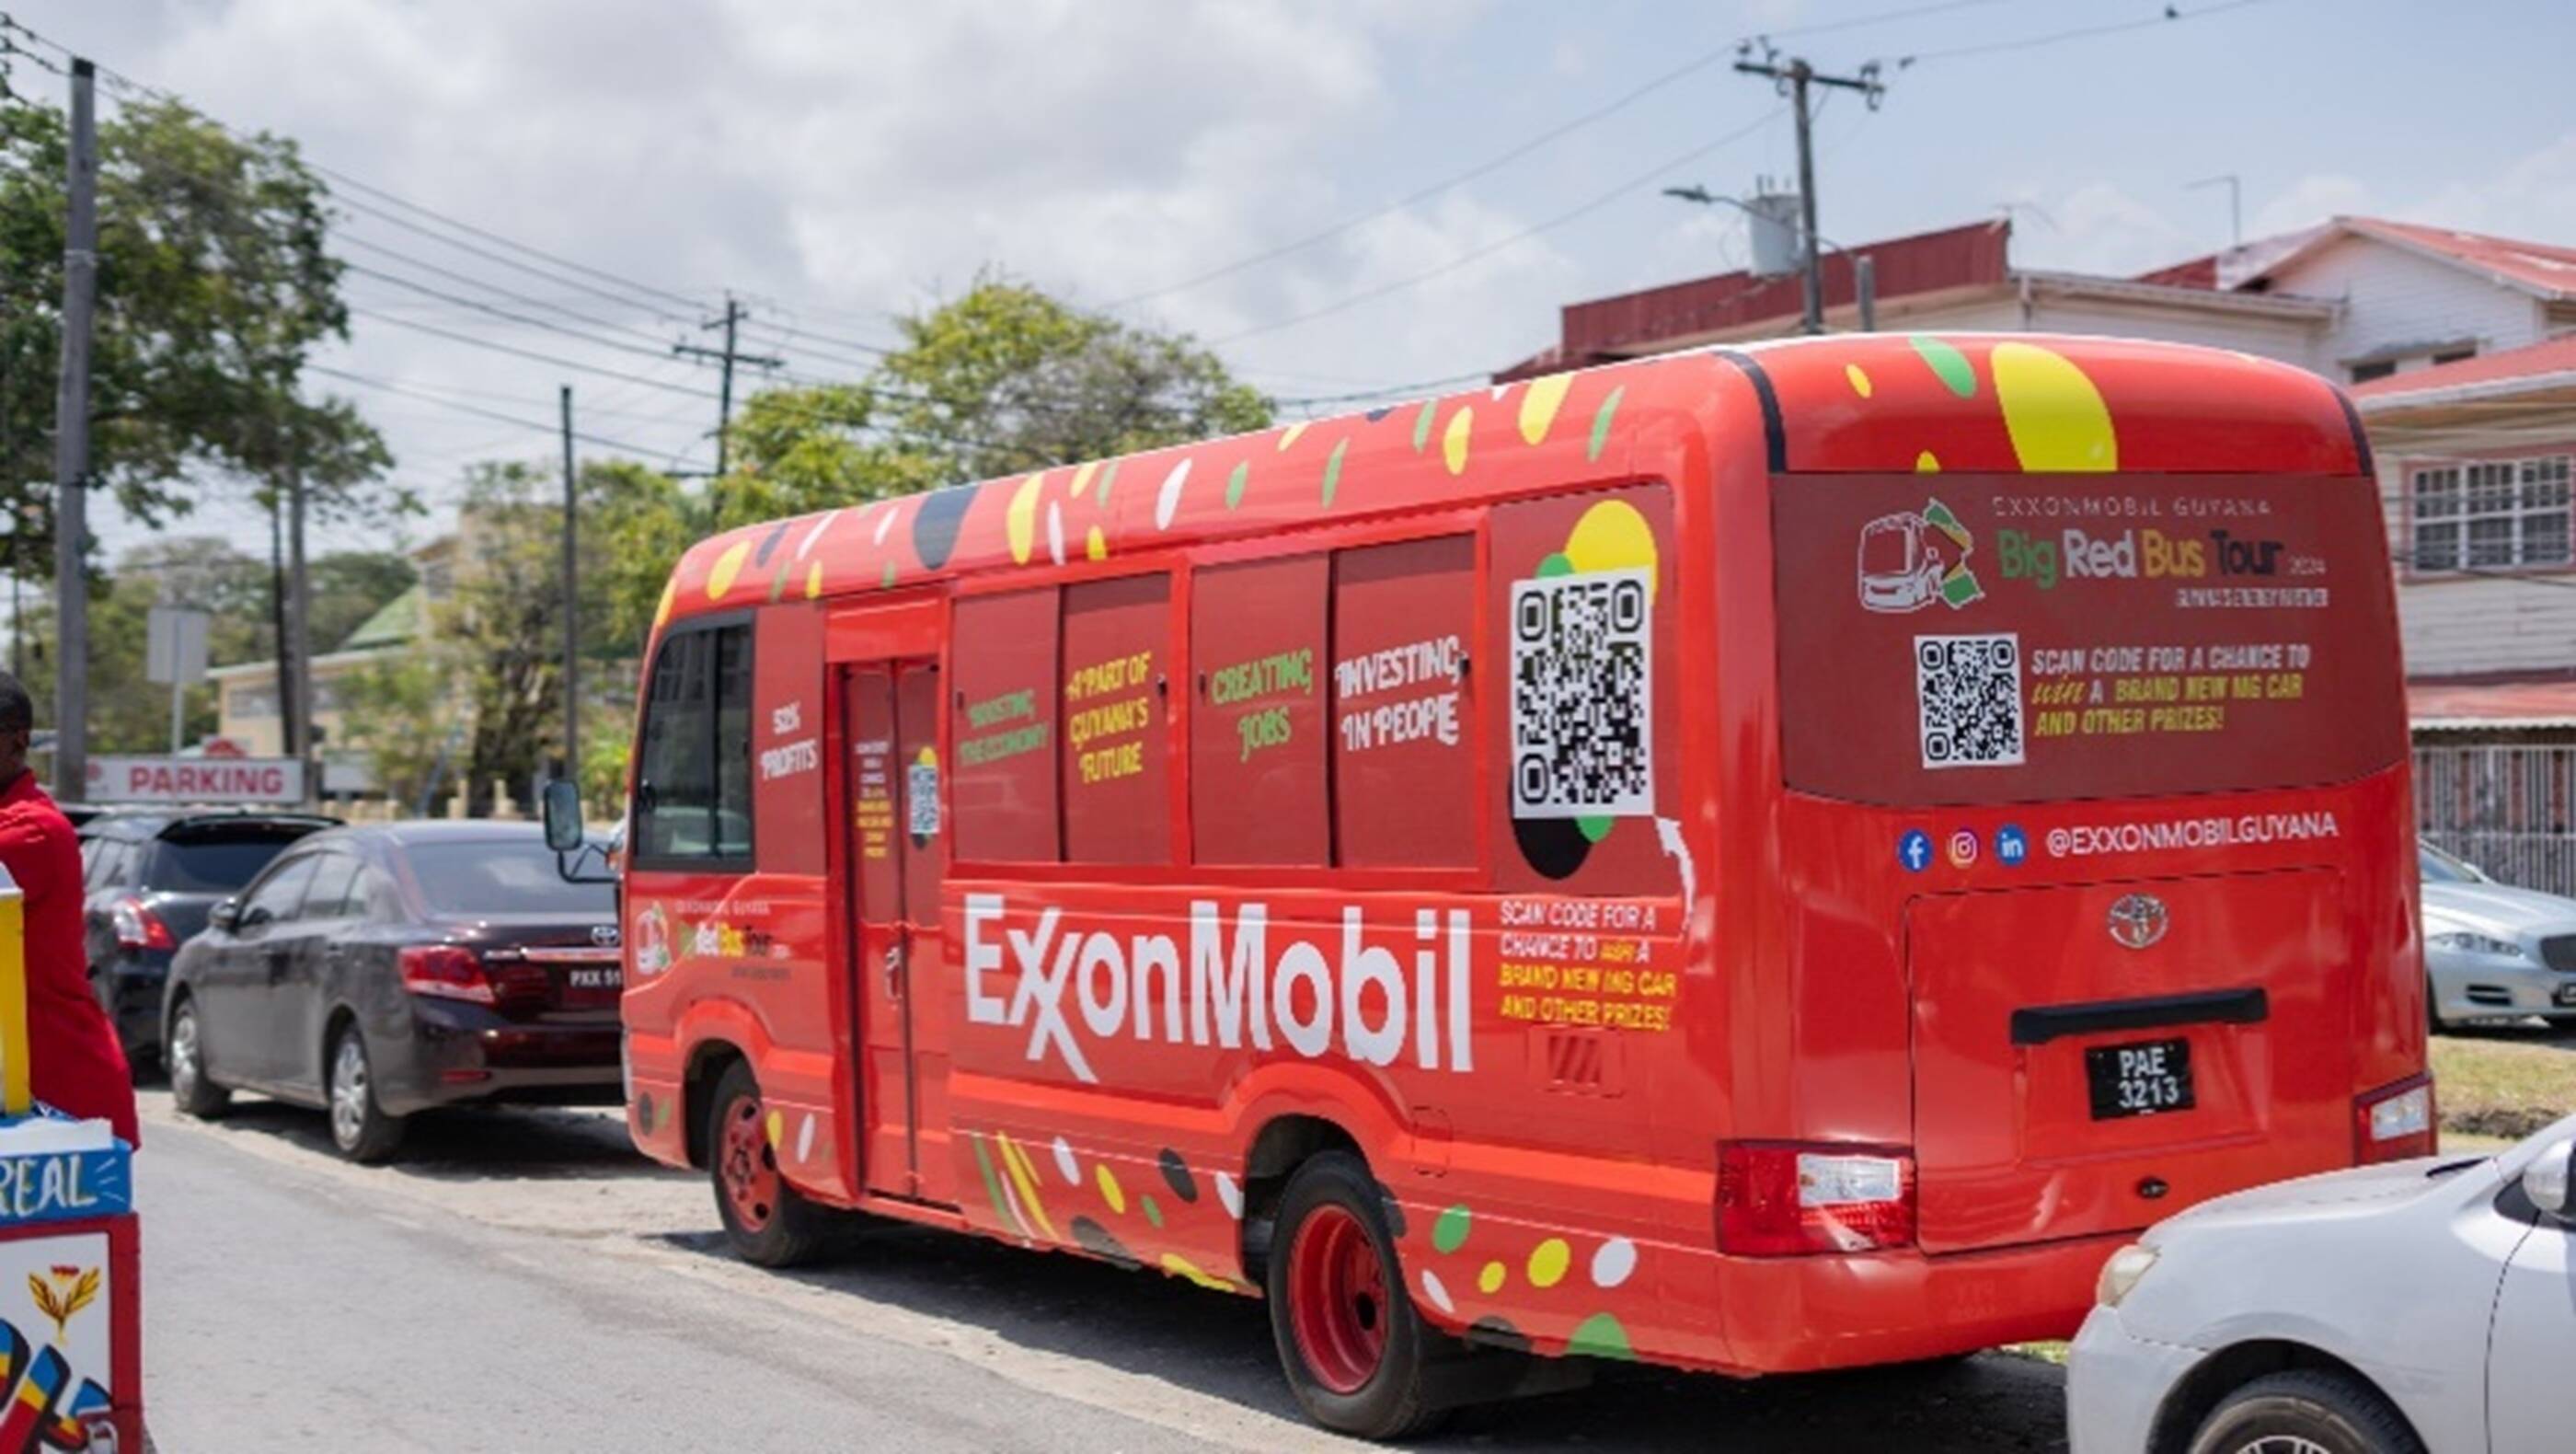 The ExxonMobil Guyana Big Red Bus toured various regions across the country and our employees engaged with citizens, community leaders and local media.